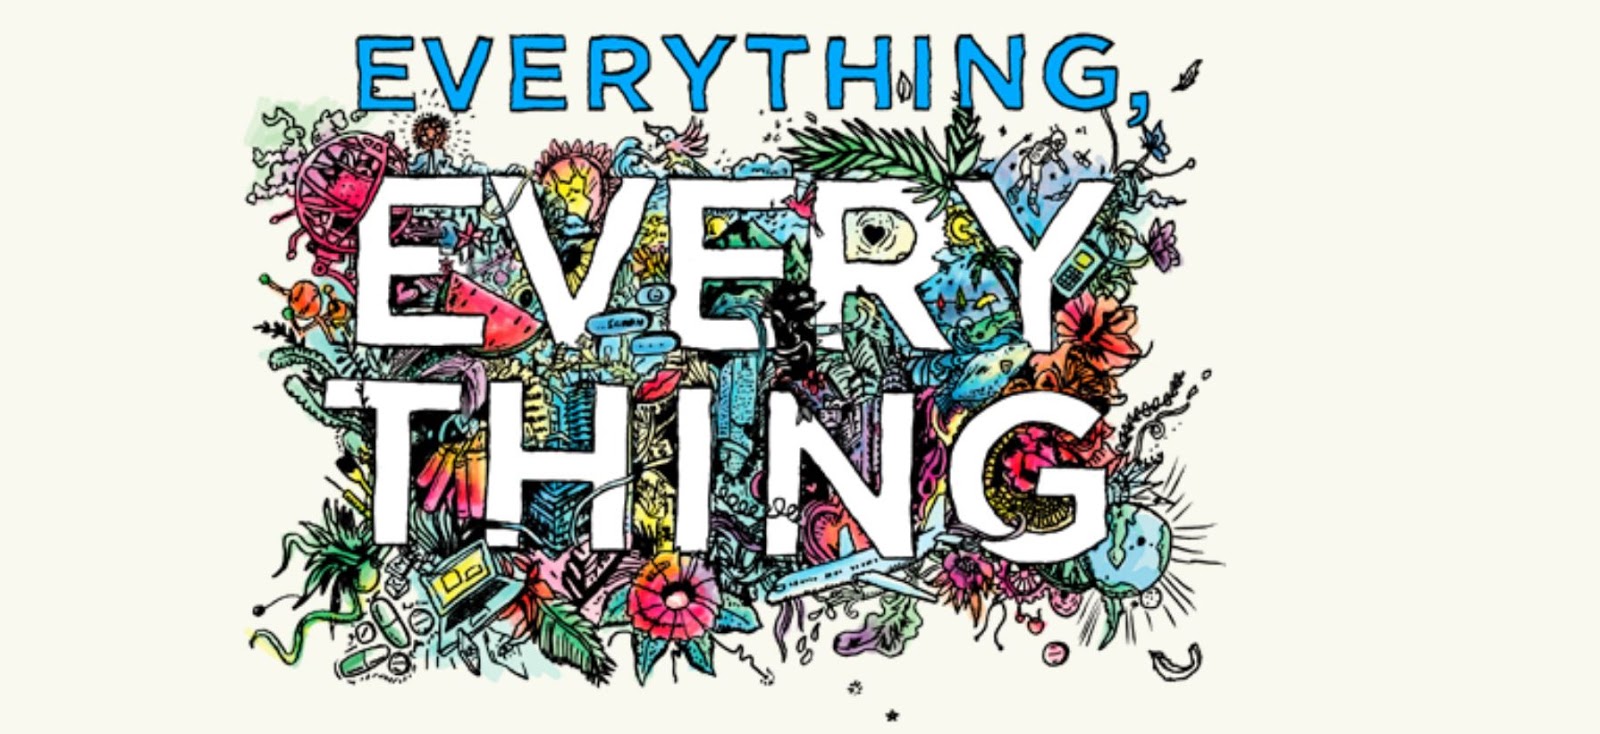 Everything is ones. Everything. Everything игра. Иконка everything. Everything about everything.